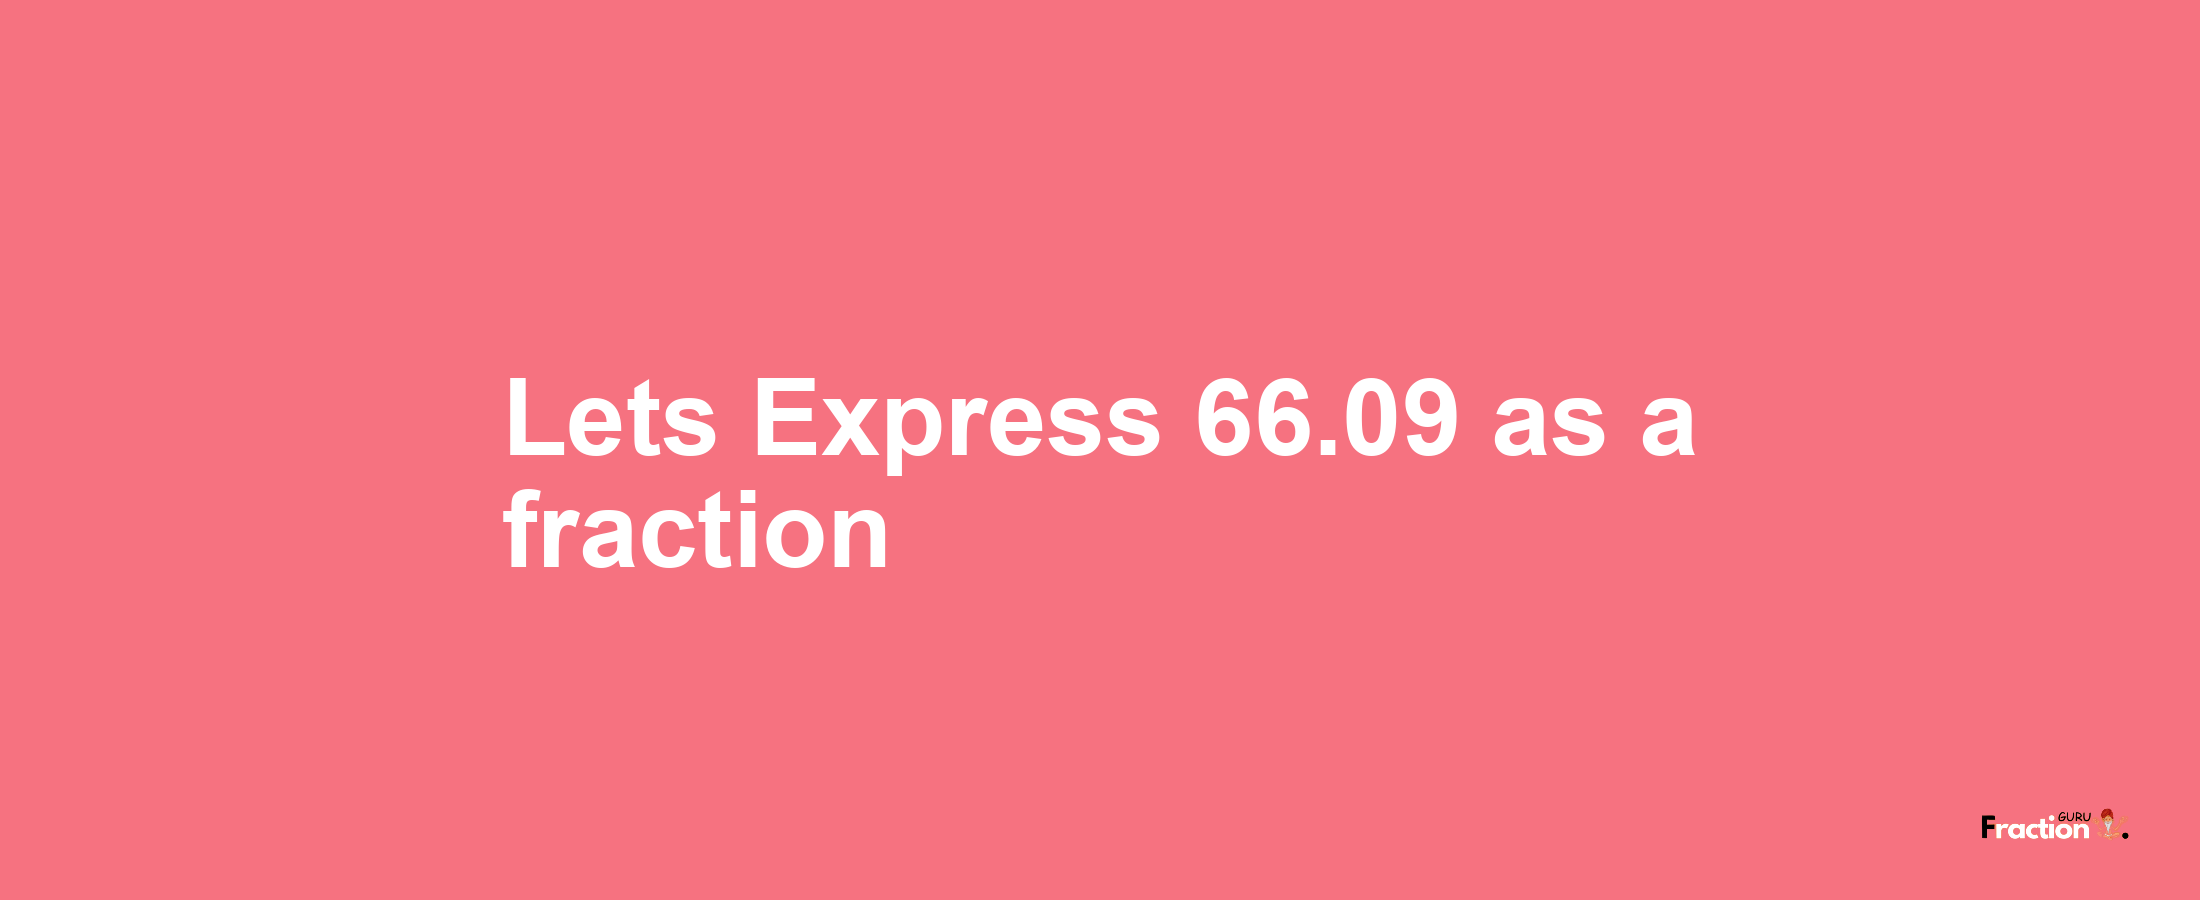 Lets Express 66.09 as afraction